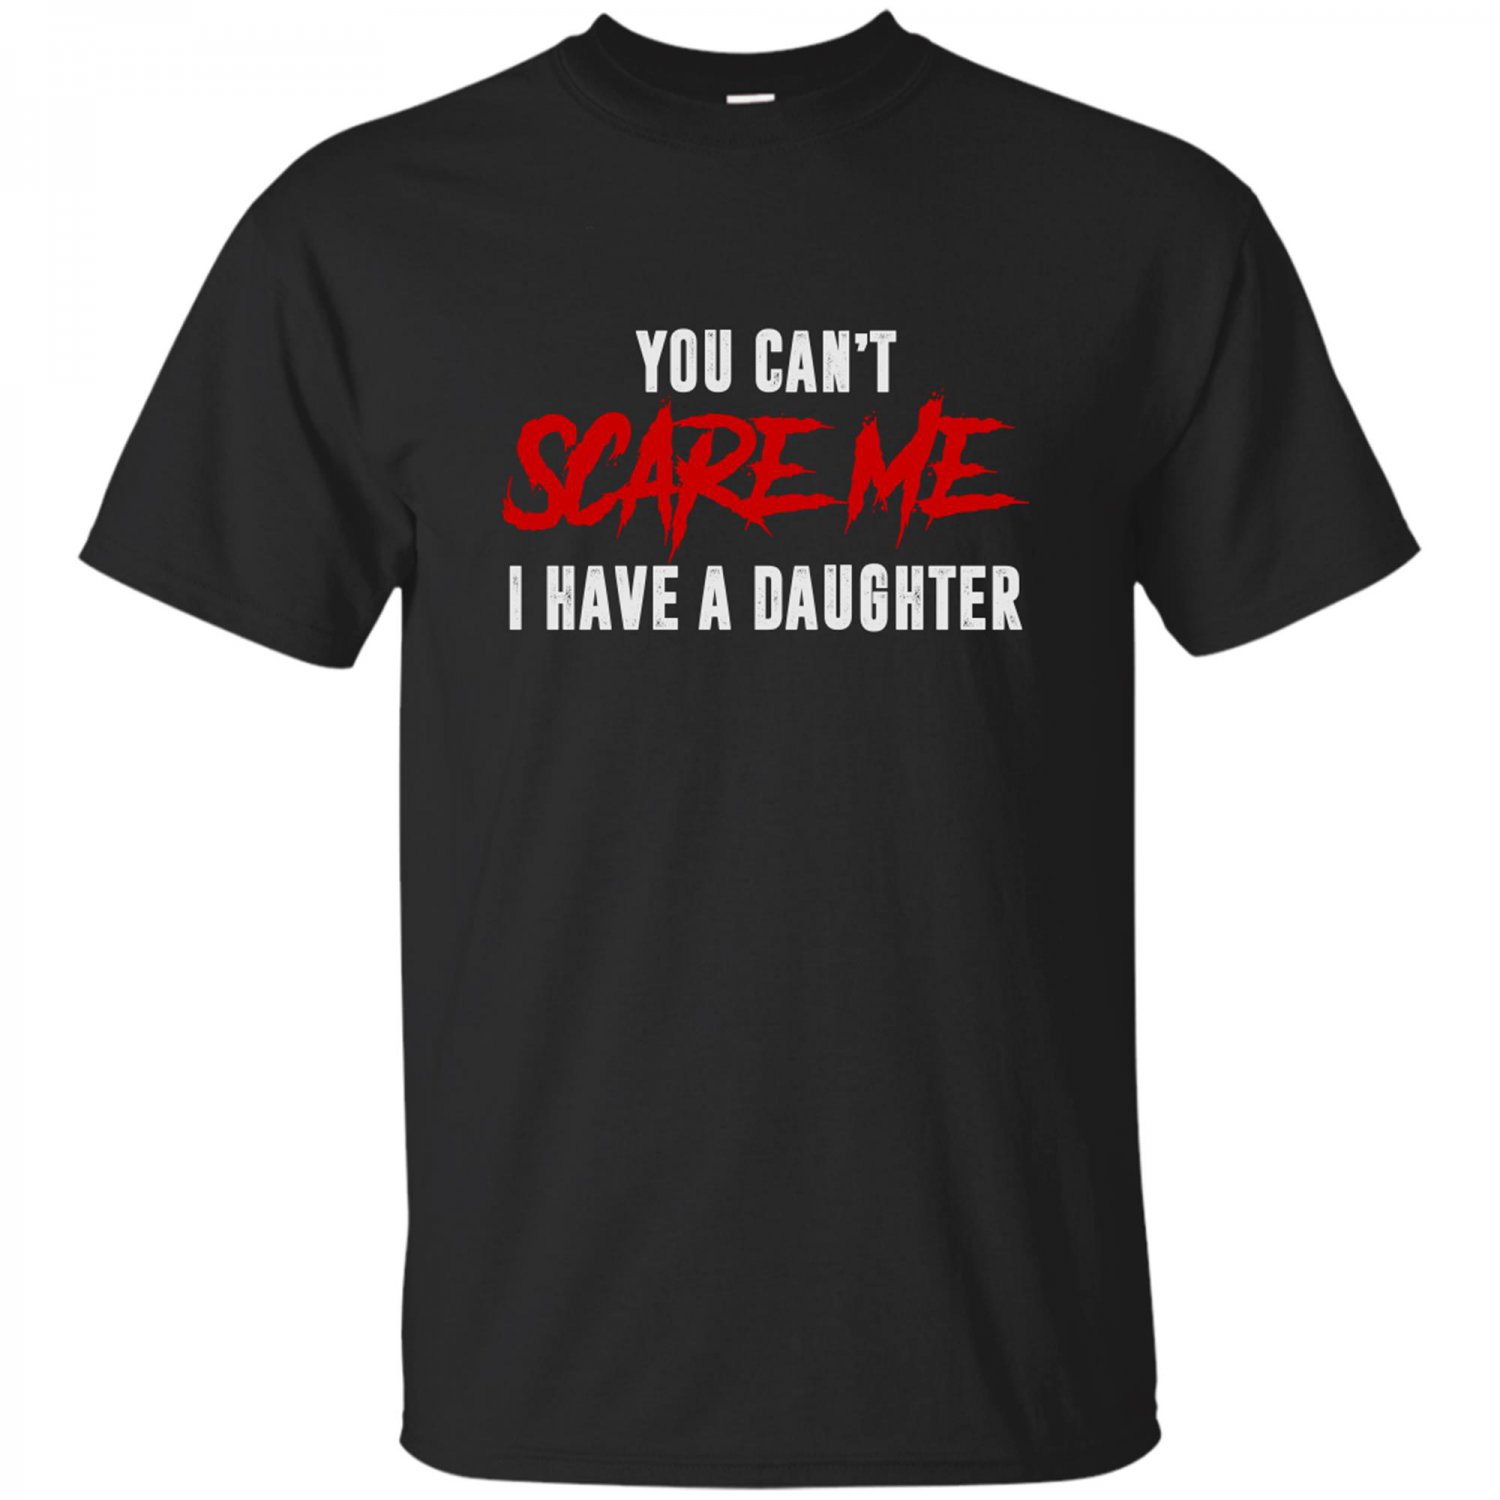 Funny Dad Shirt Daughter Tshirt For Father Adult T-shirt